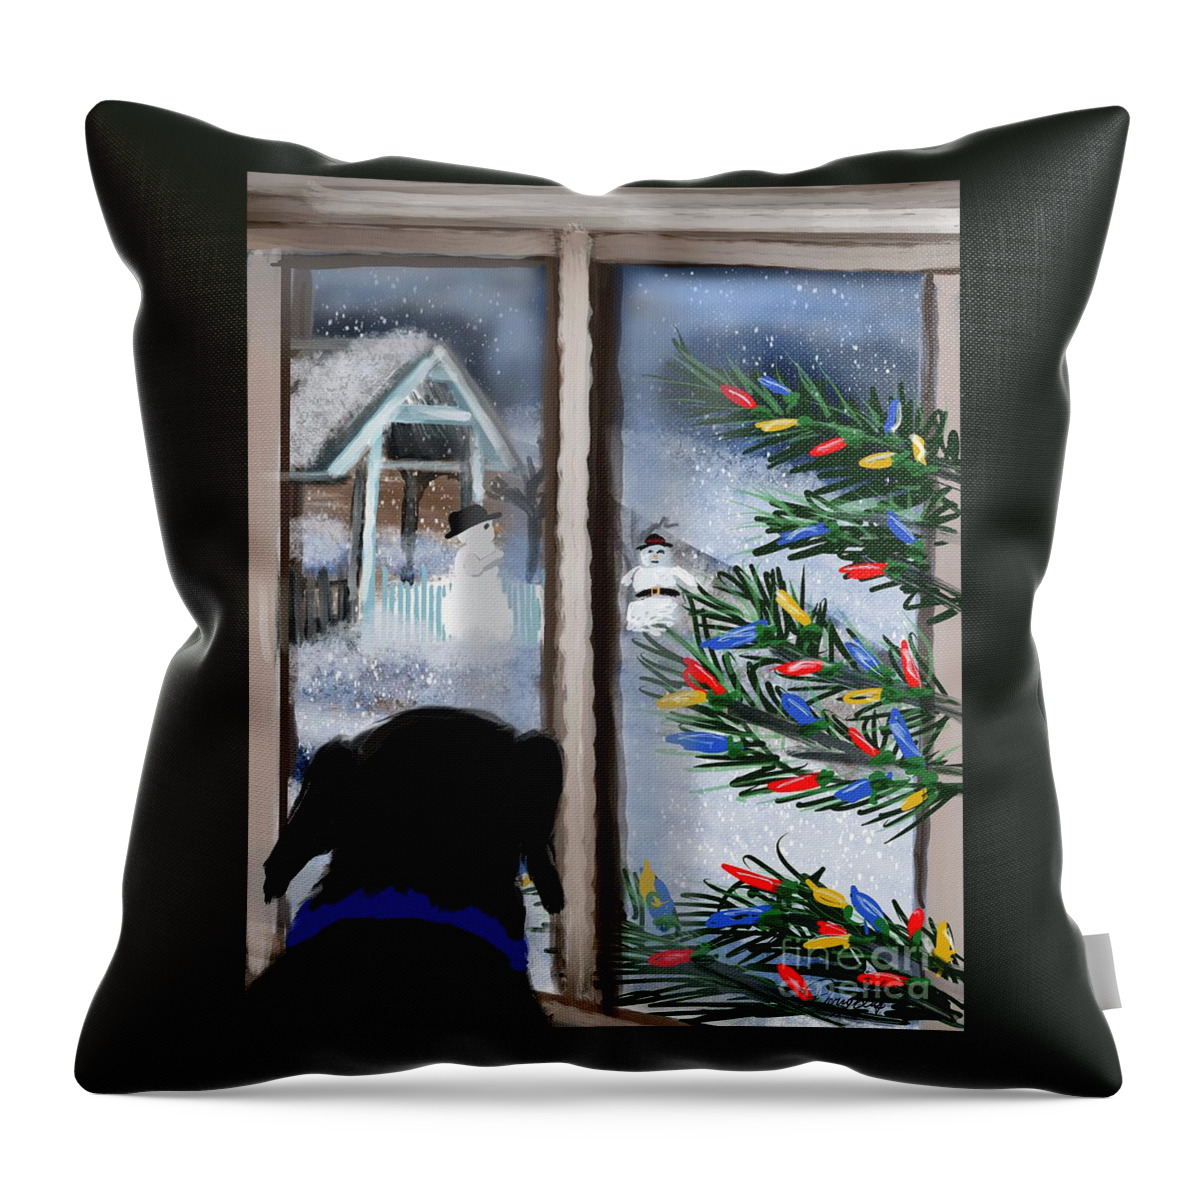 Dogs Throw Pillow featuring the digital art A Dogs Christmas Wonderland by Doug Gist